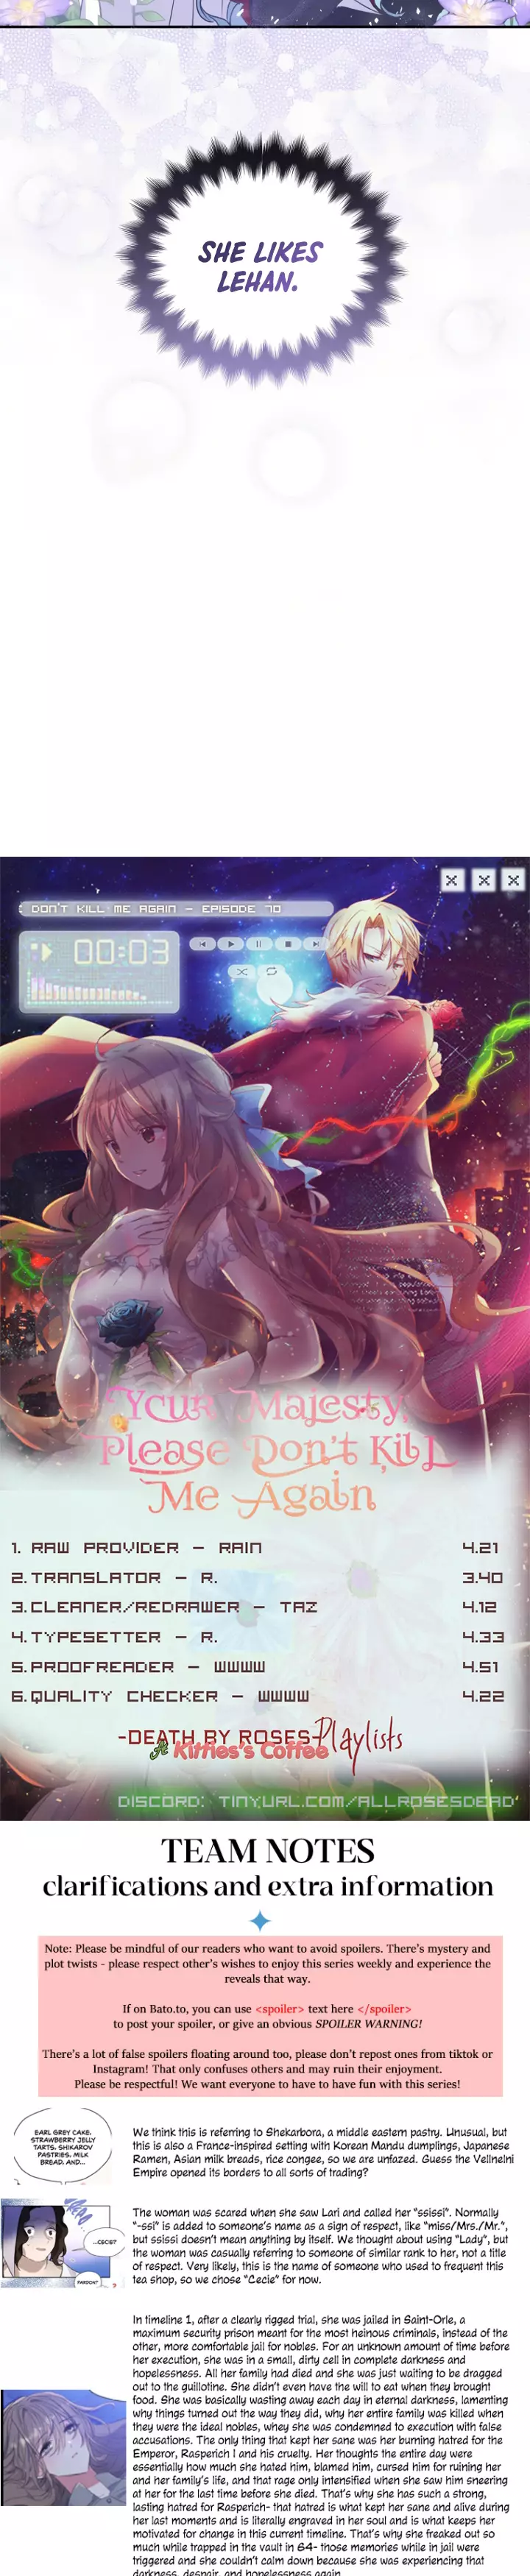 Your Majesty, Please Don't Kill Me Again - 70 page 37-db5c5a5d